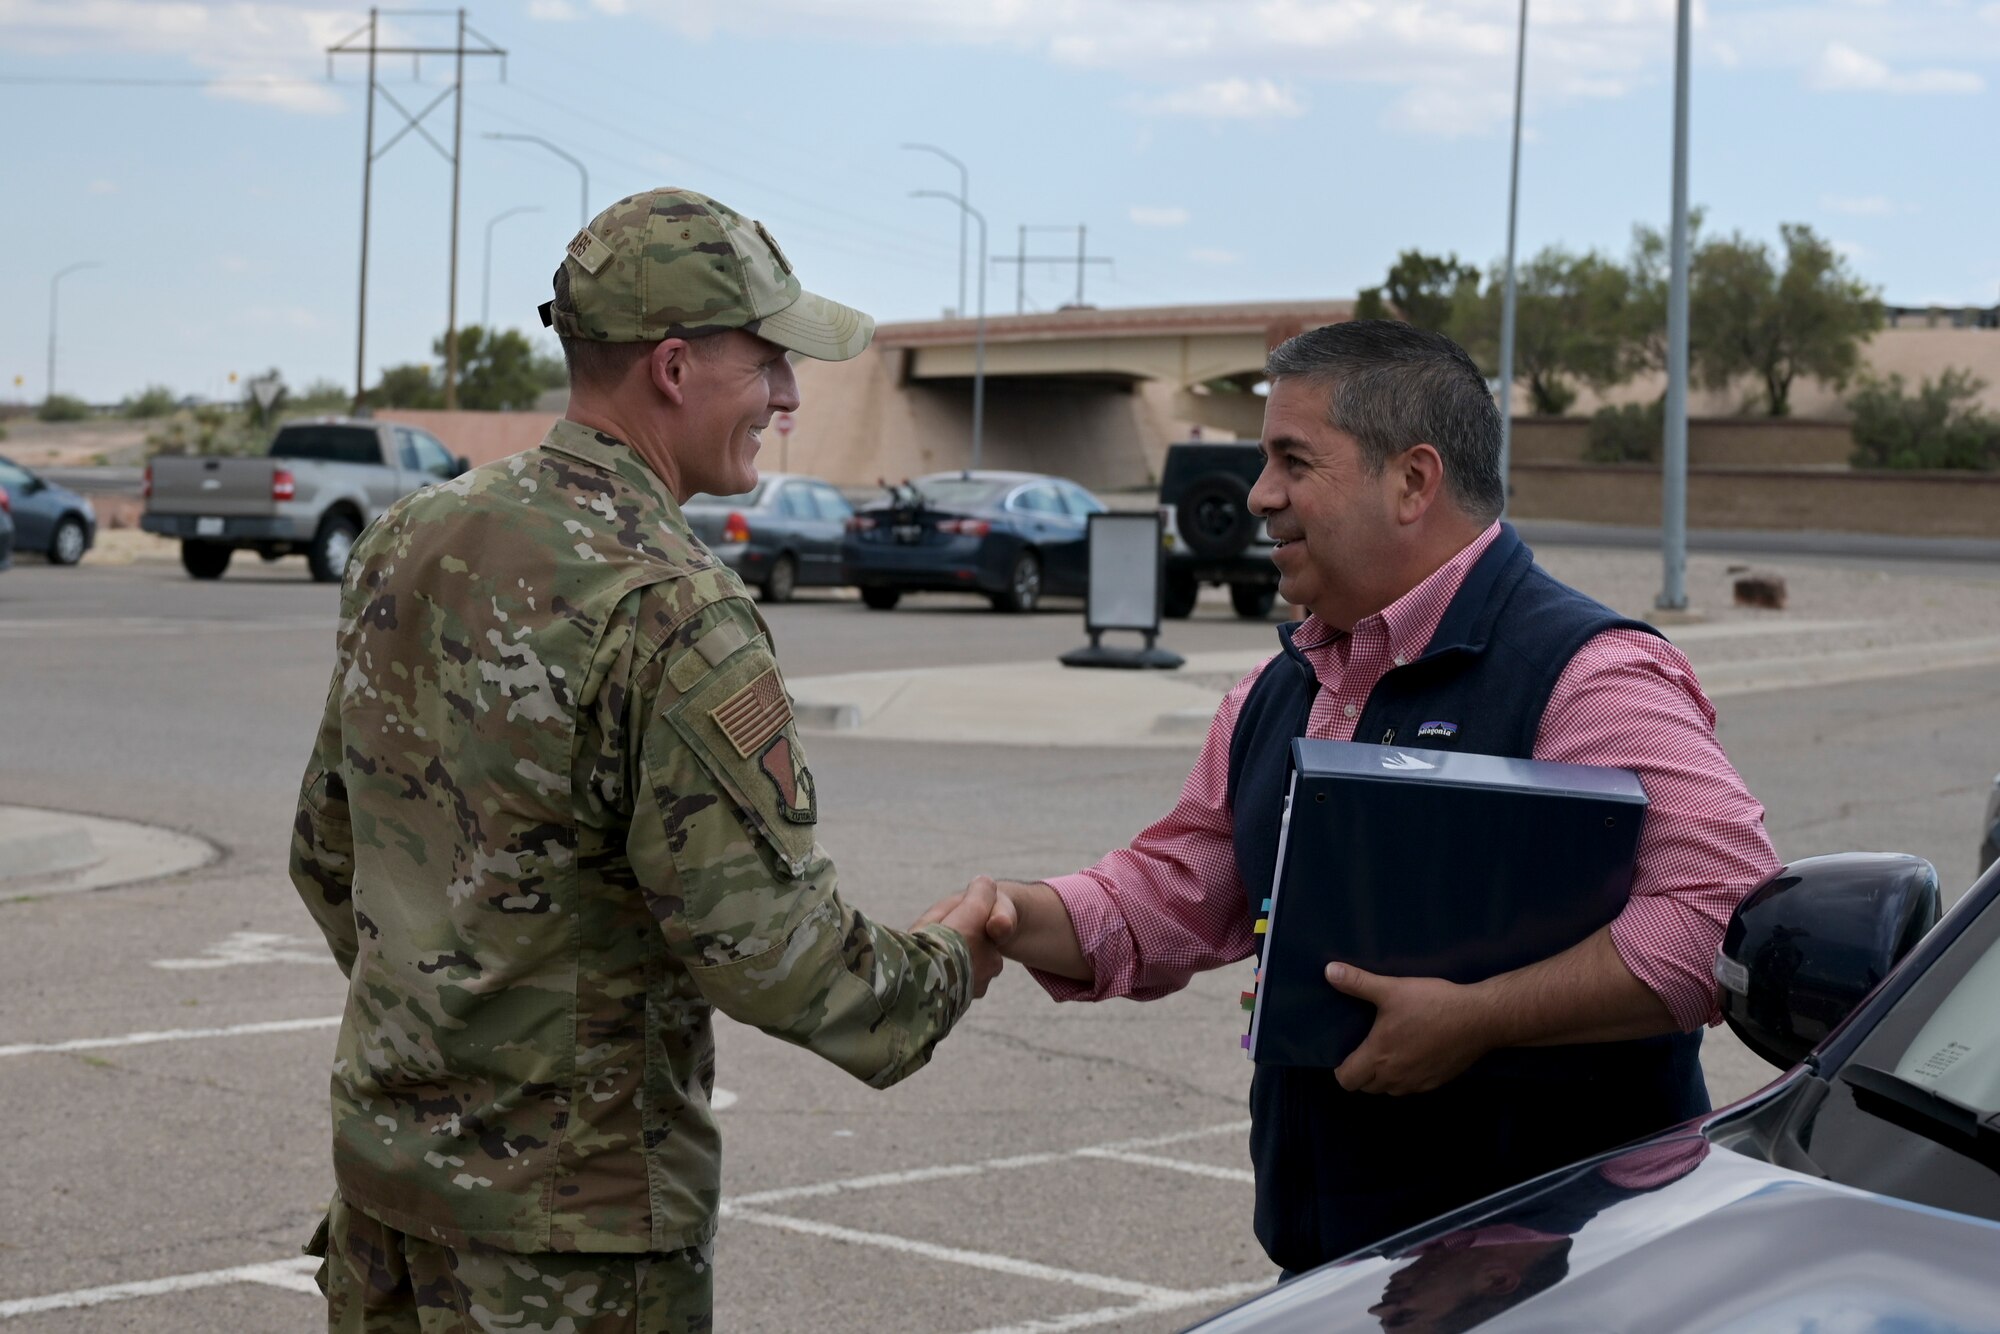 Col. Justin Spears, 49th Wing commander, greets Sen. Ben Ray Lujan as he arrives at Holloman Air Force Base, New Mexico, August 15, 2022. Lujan visited Holloman to learn about the 49th Wing and mission partner operations. (U.S. Air Force photo by Airman 1st Class Antonio Salfran)